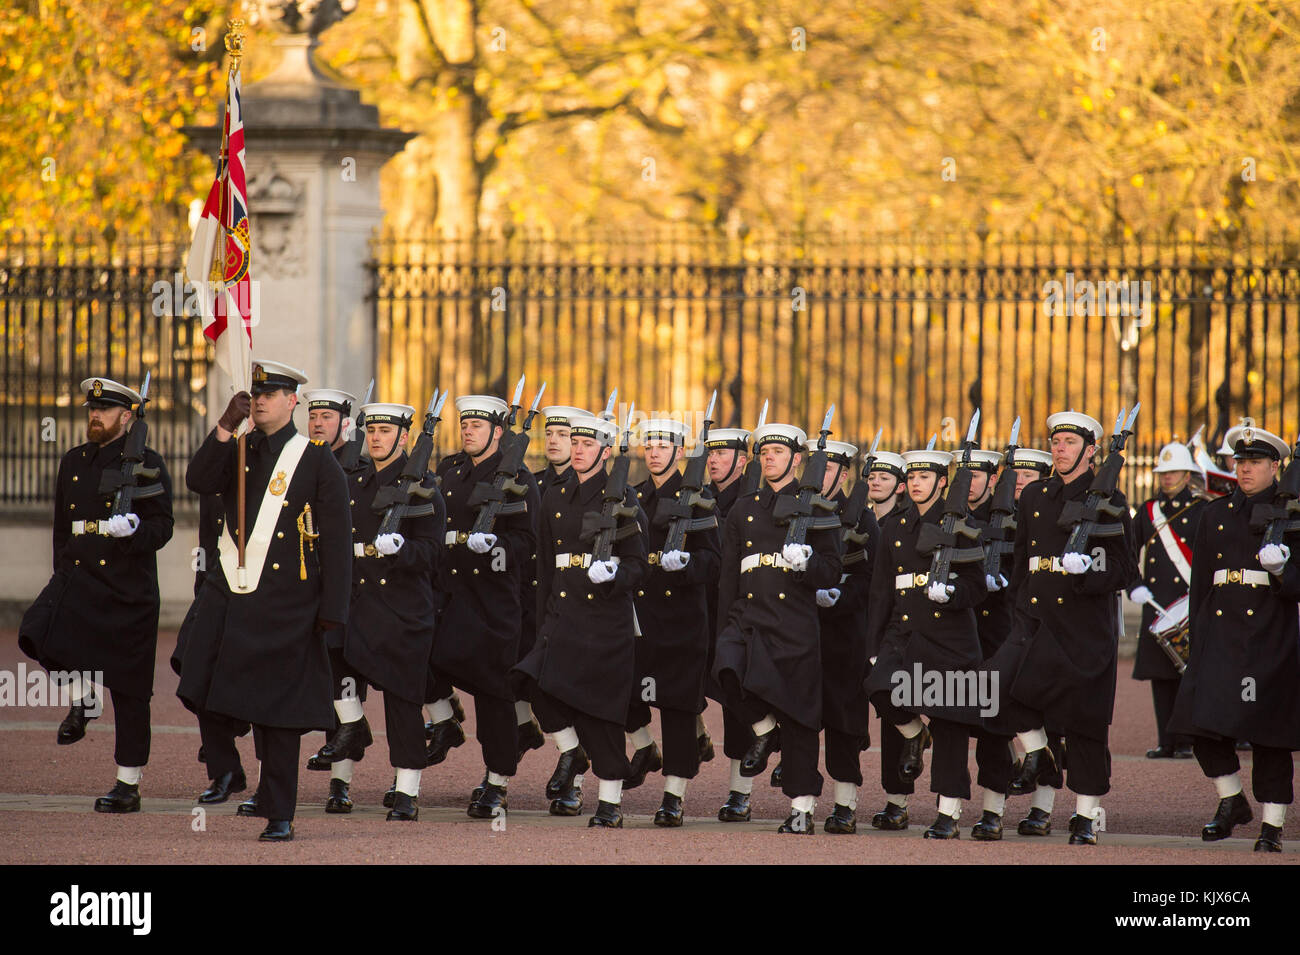 Sailors from the Royal Navy perform the Changing of the Guard ceremony at Buckingham Palace, London, for the first time in its 357-year history. Stock Photo